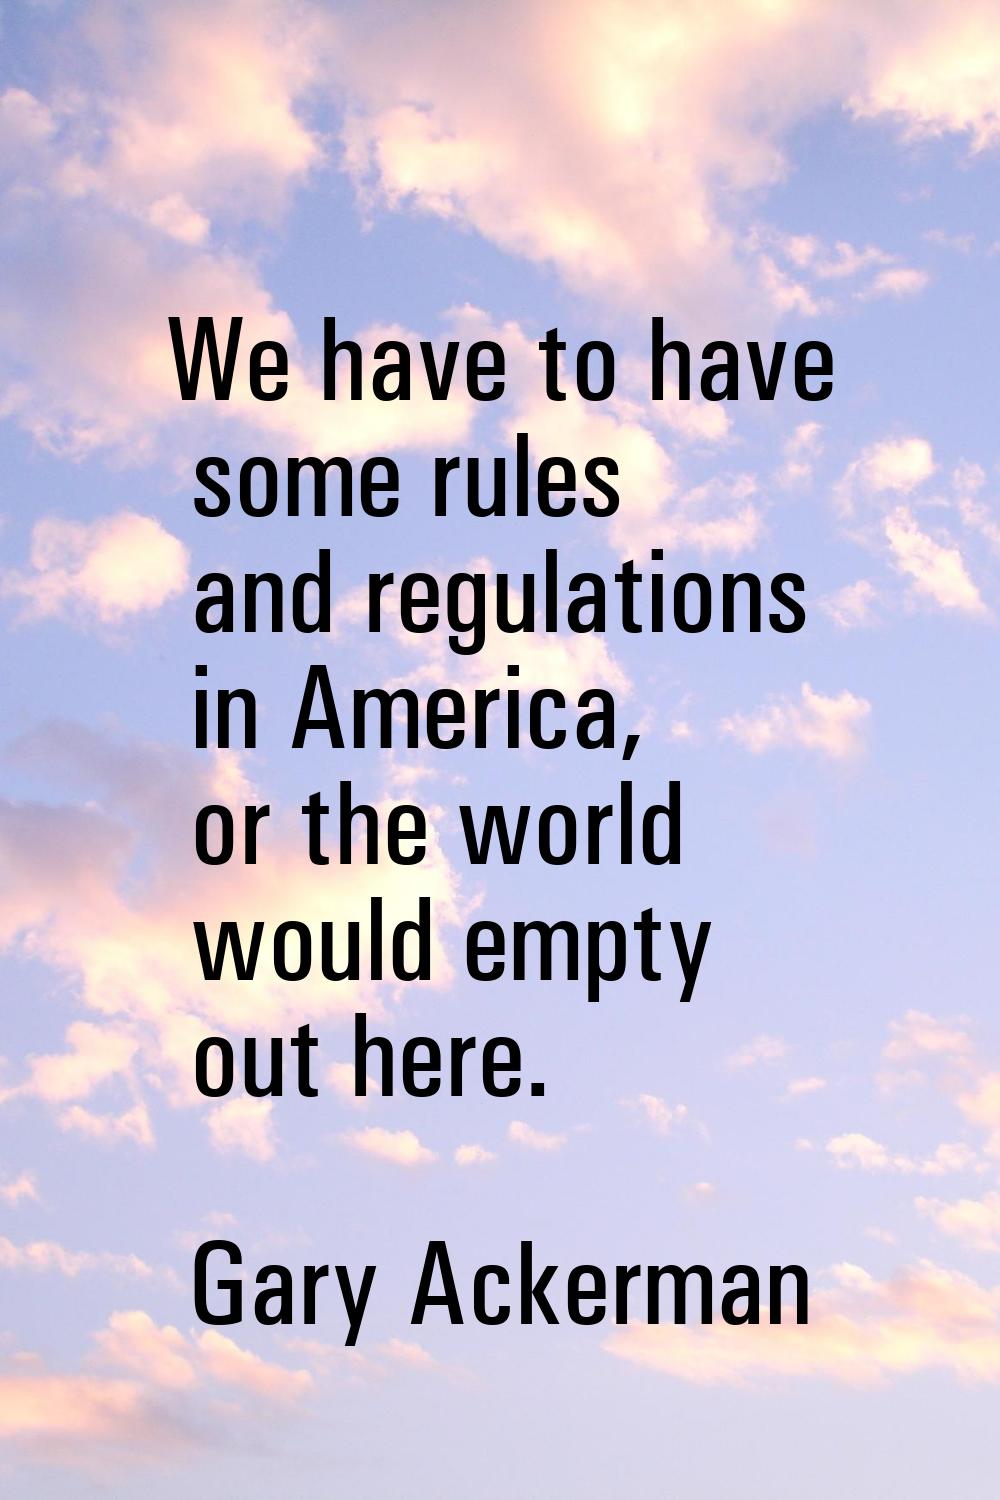 We have to have some rules and regulations in America, or the world would empty out here.